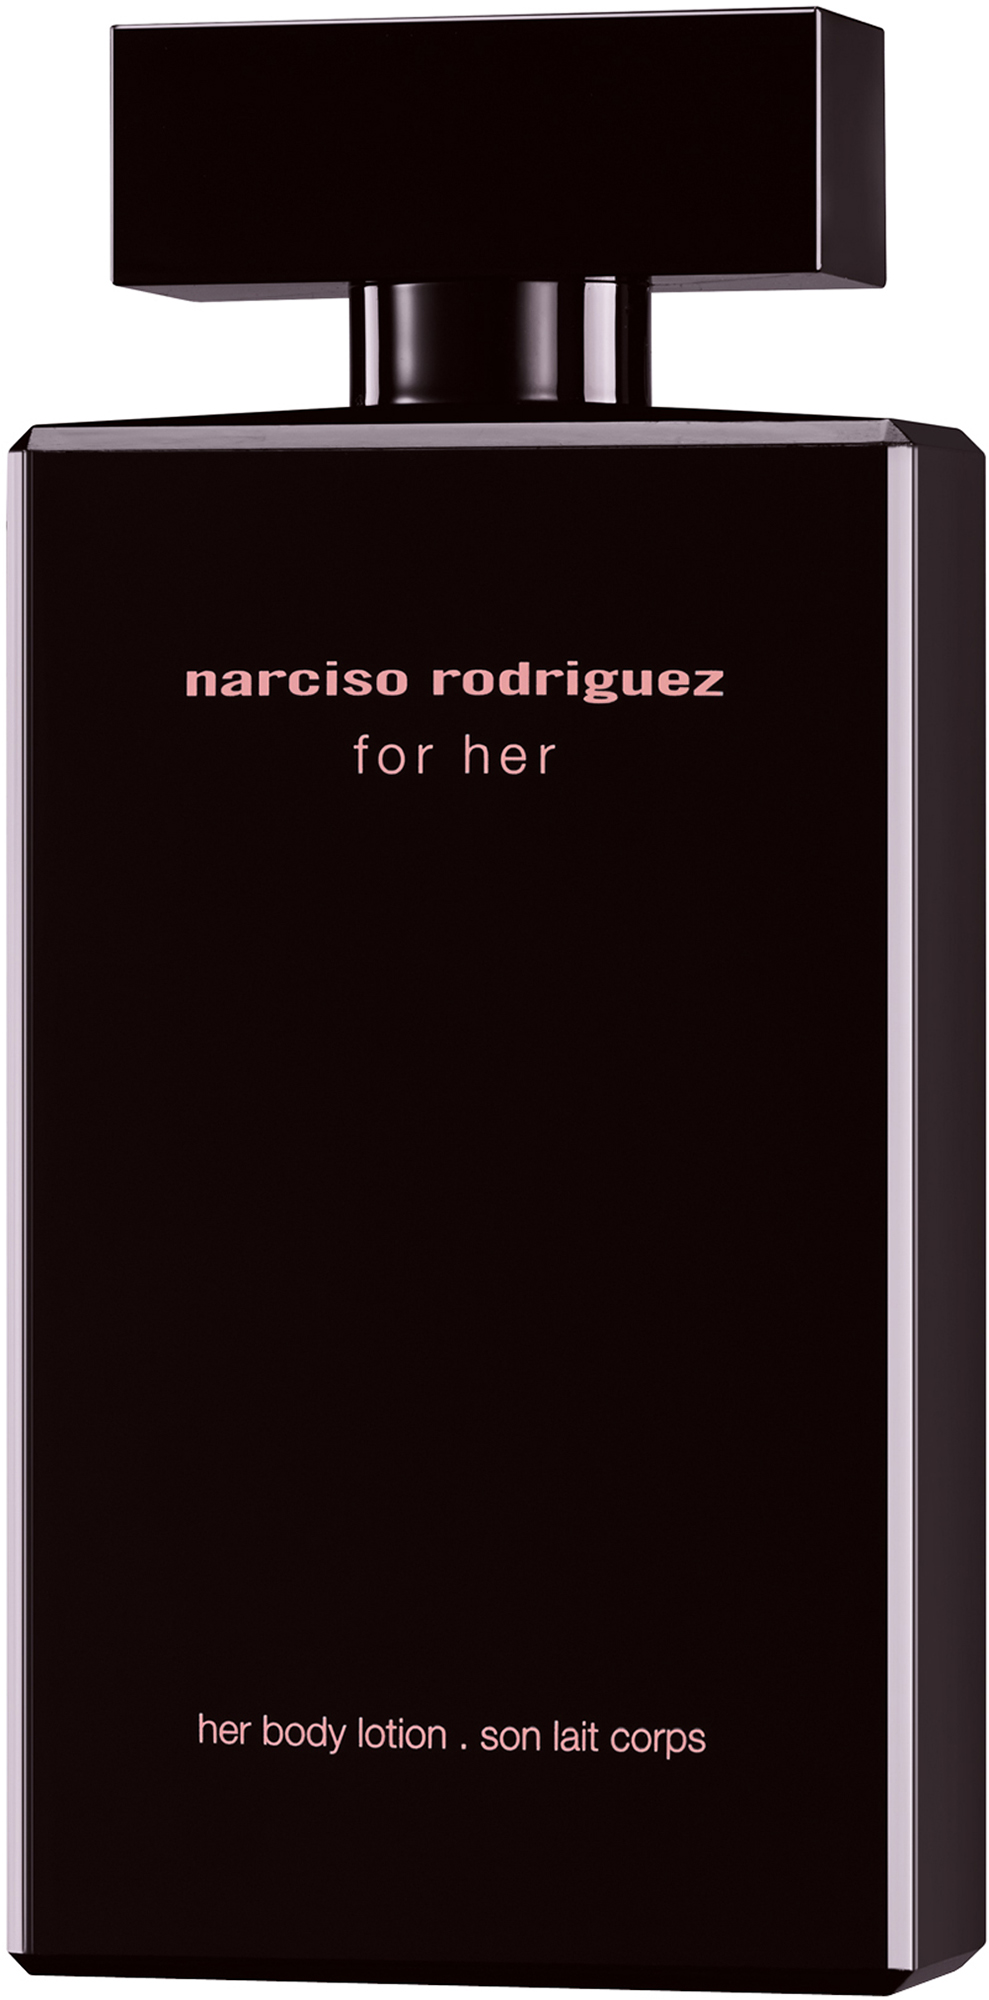 Narciso Rodriguez Body 200 For Lotion Her ml